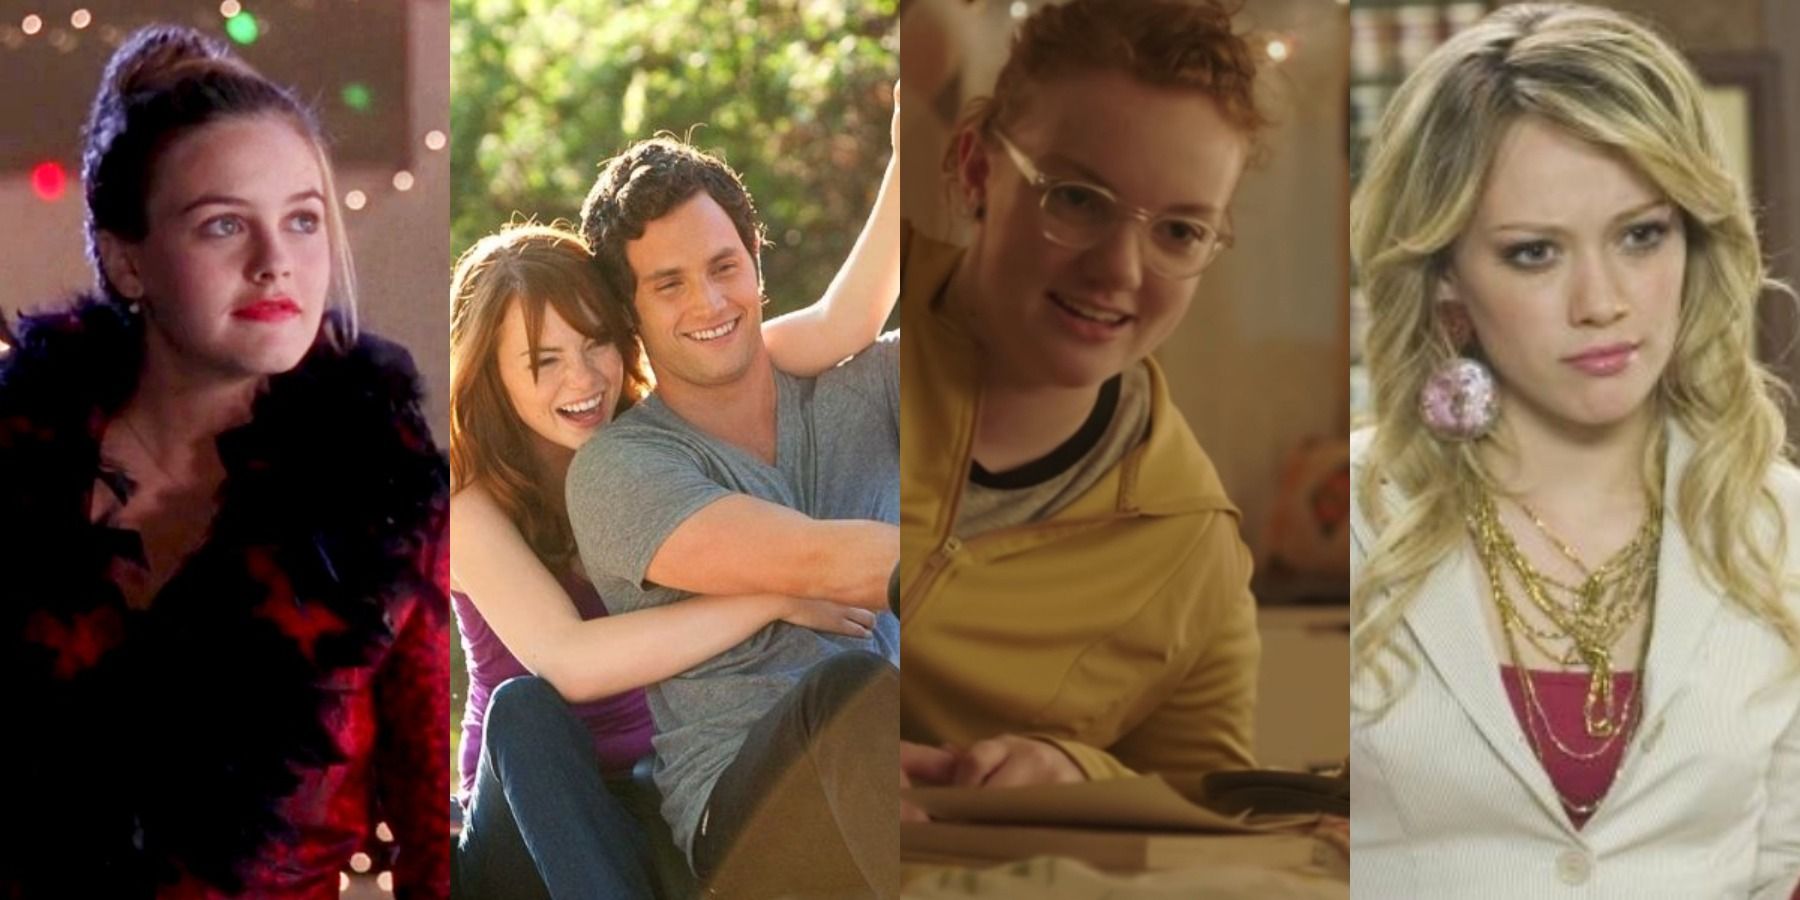 Clueless, Easy A, Sierra Burgess is a Loser, and Material Girls scene clips.